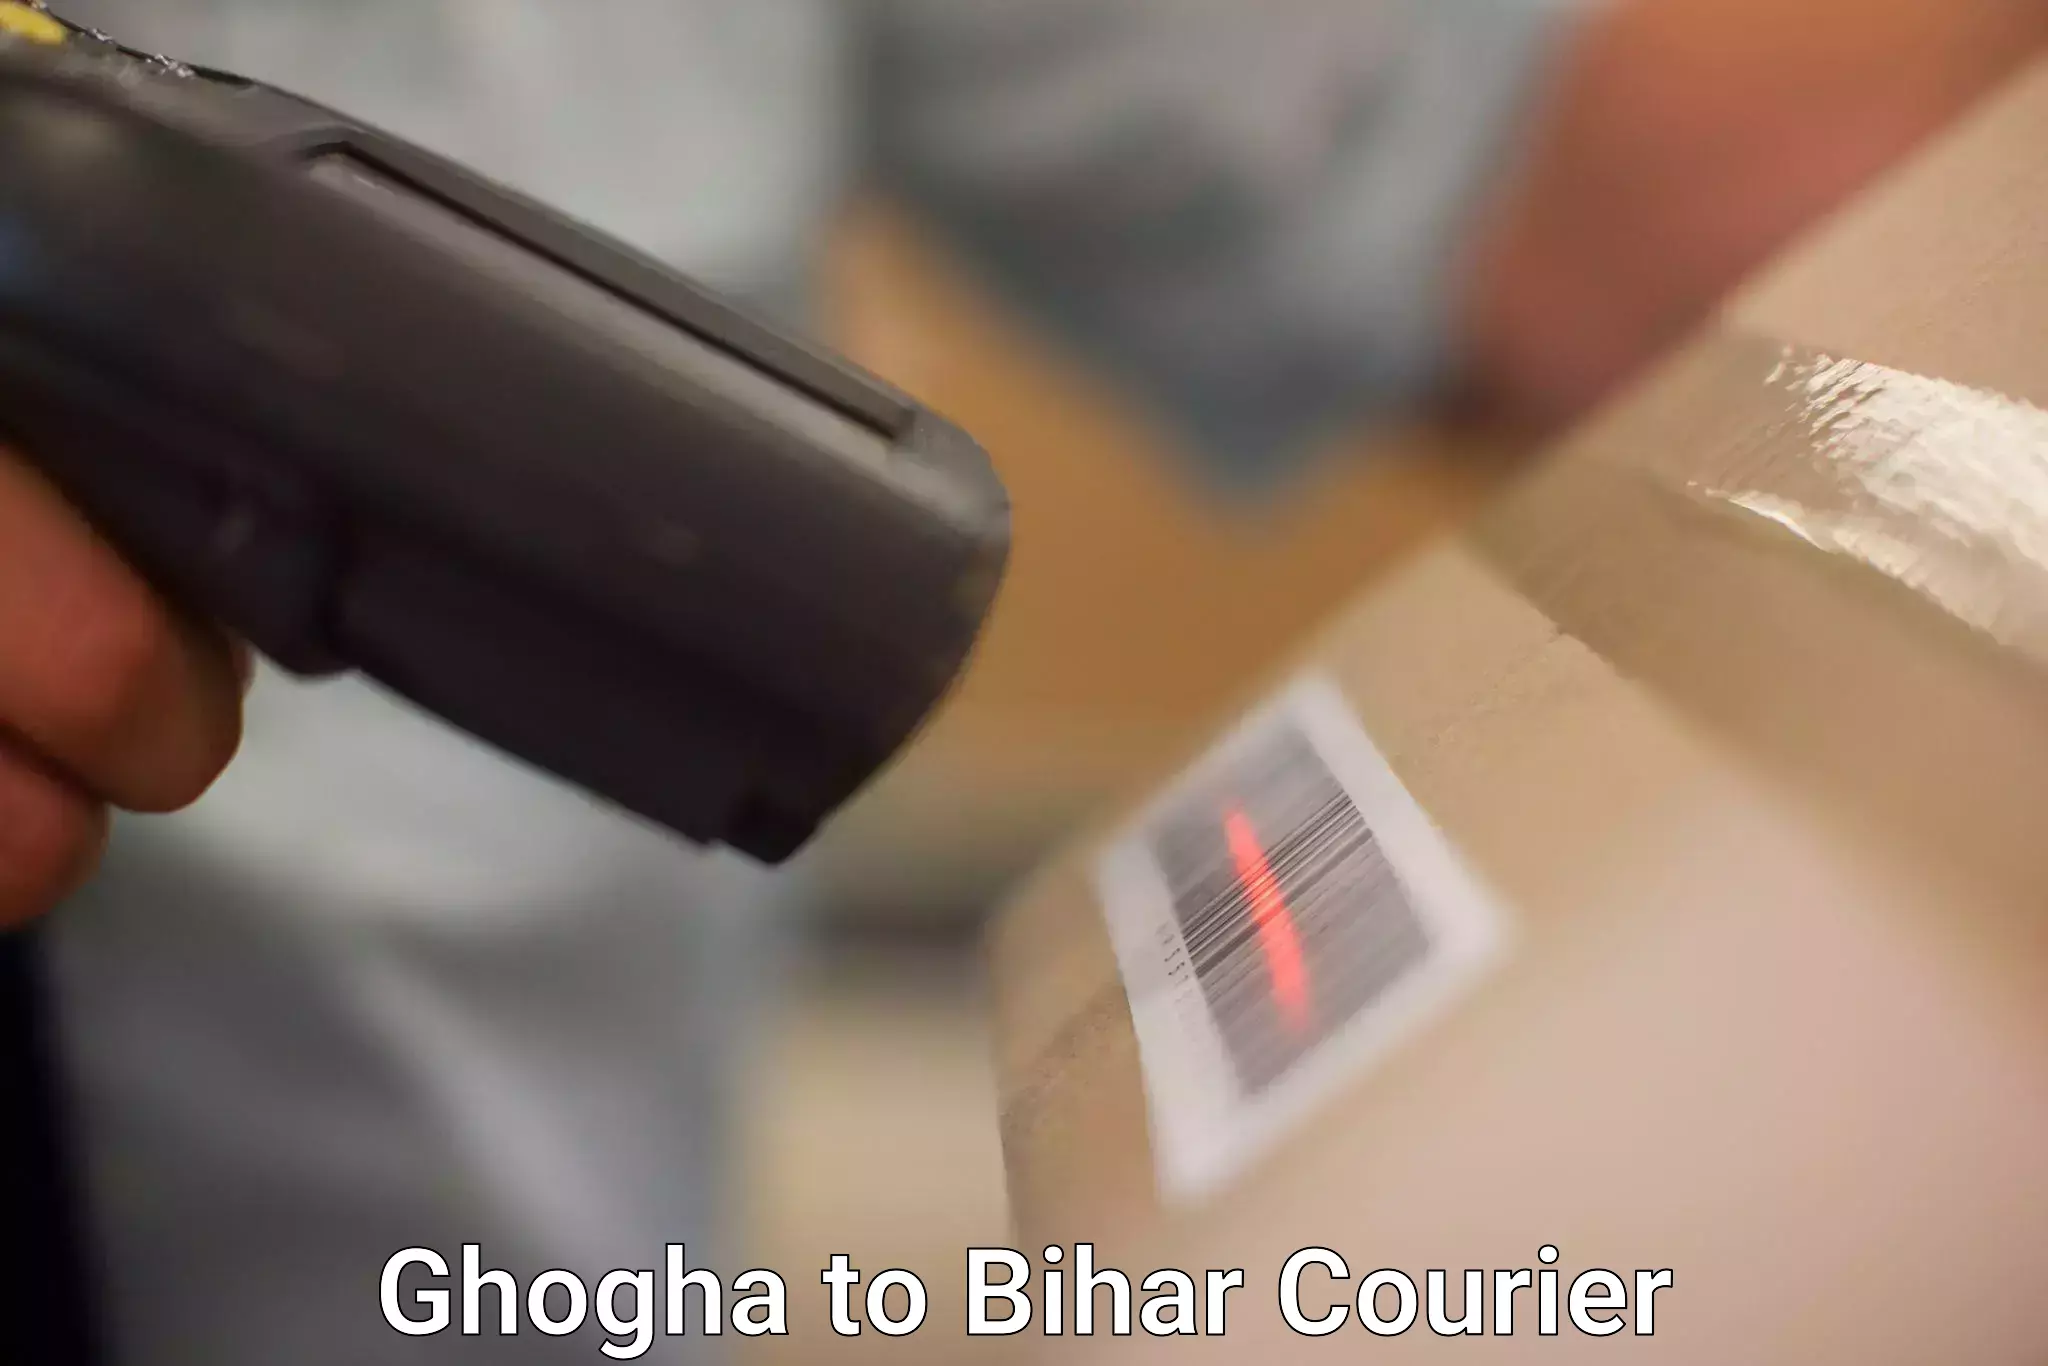 24-hour courier service in Ghogha to Rajgir